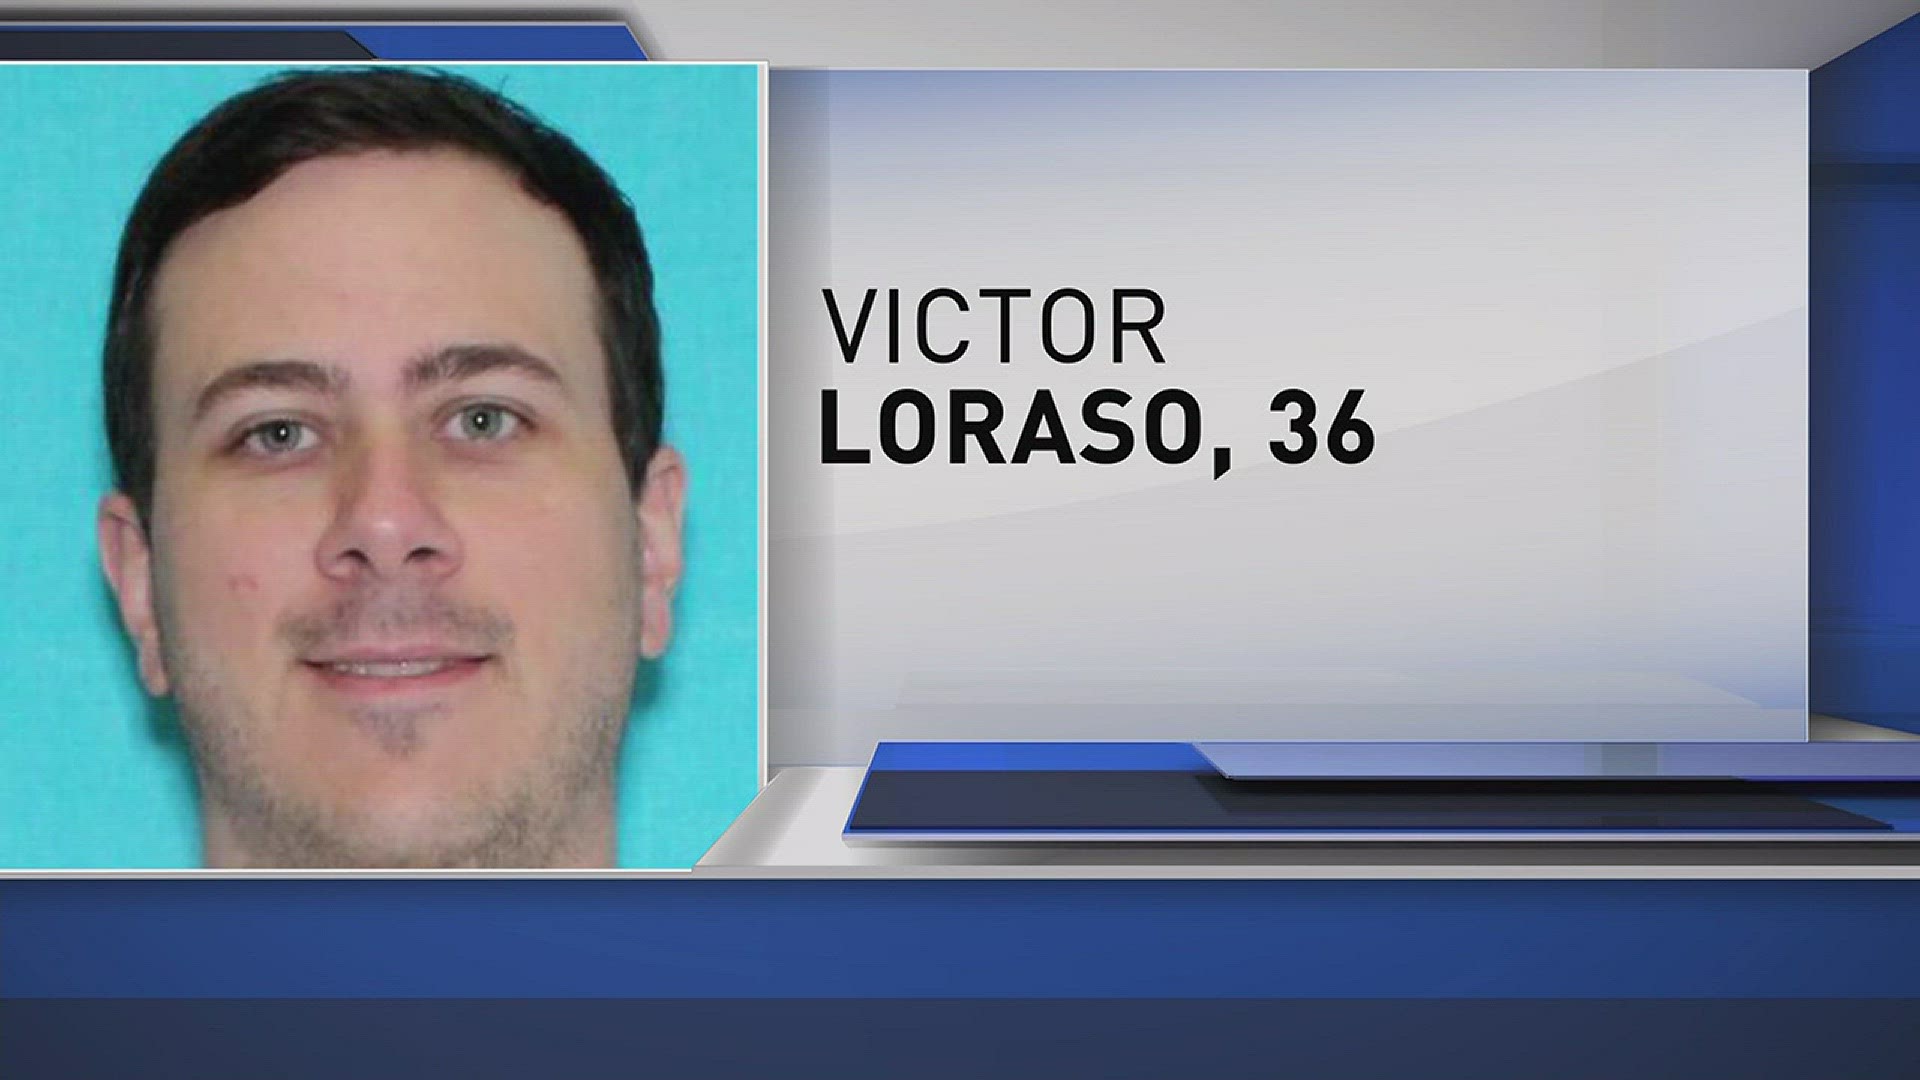 Victor Loraso, 36, was arrested on three counts of distribution of sexual abuse images/videos of children (under the age of 13).